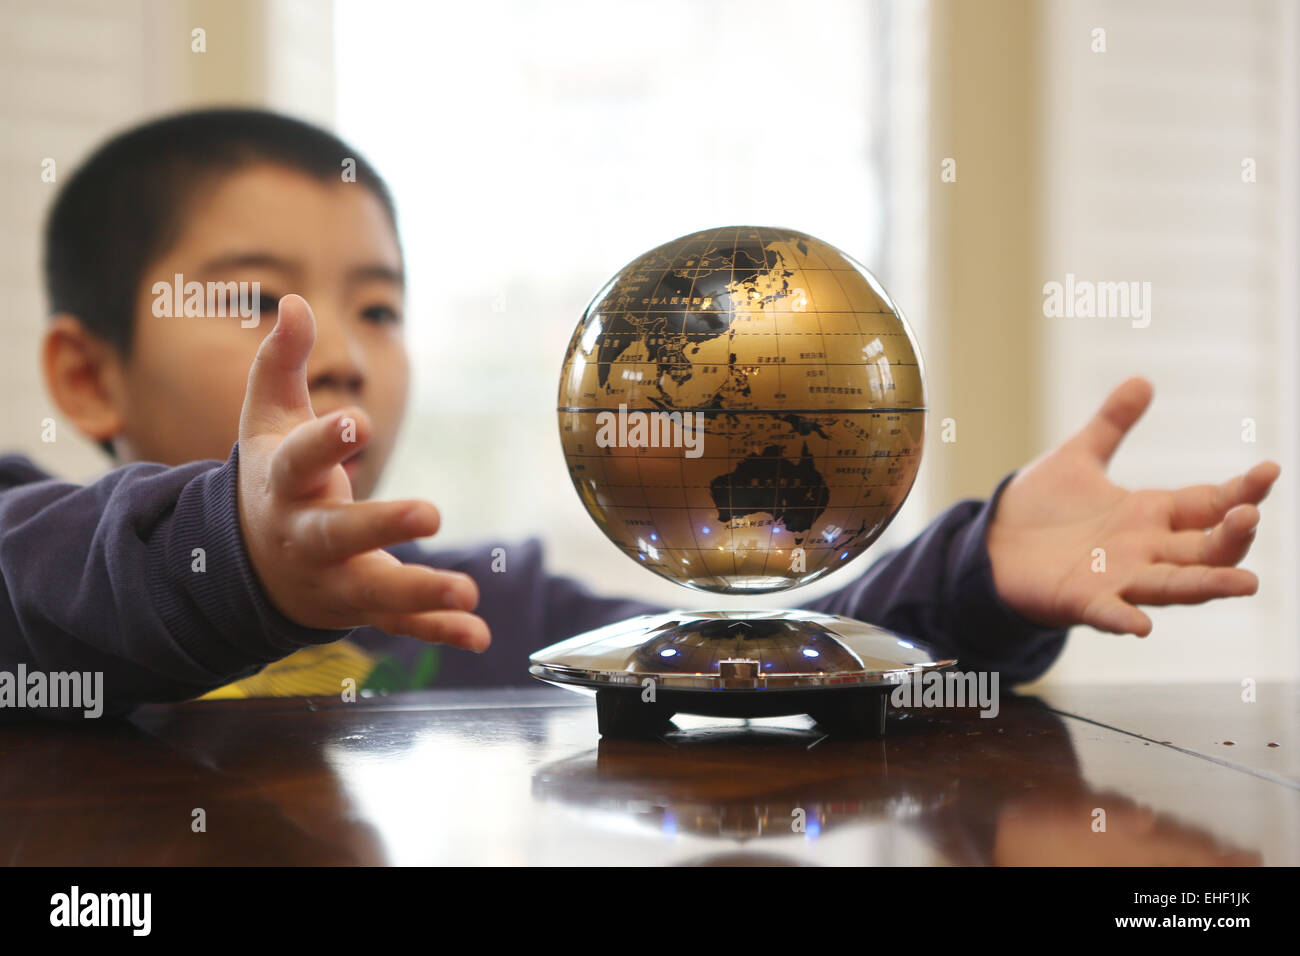 The boy stretched out his hand to hold a globe Stock Photo